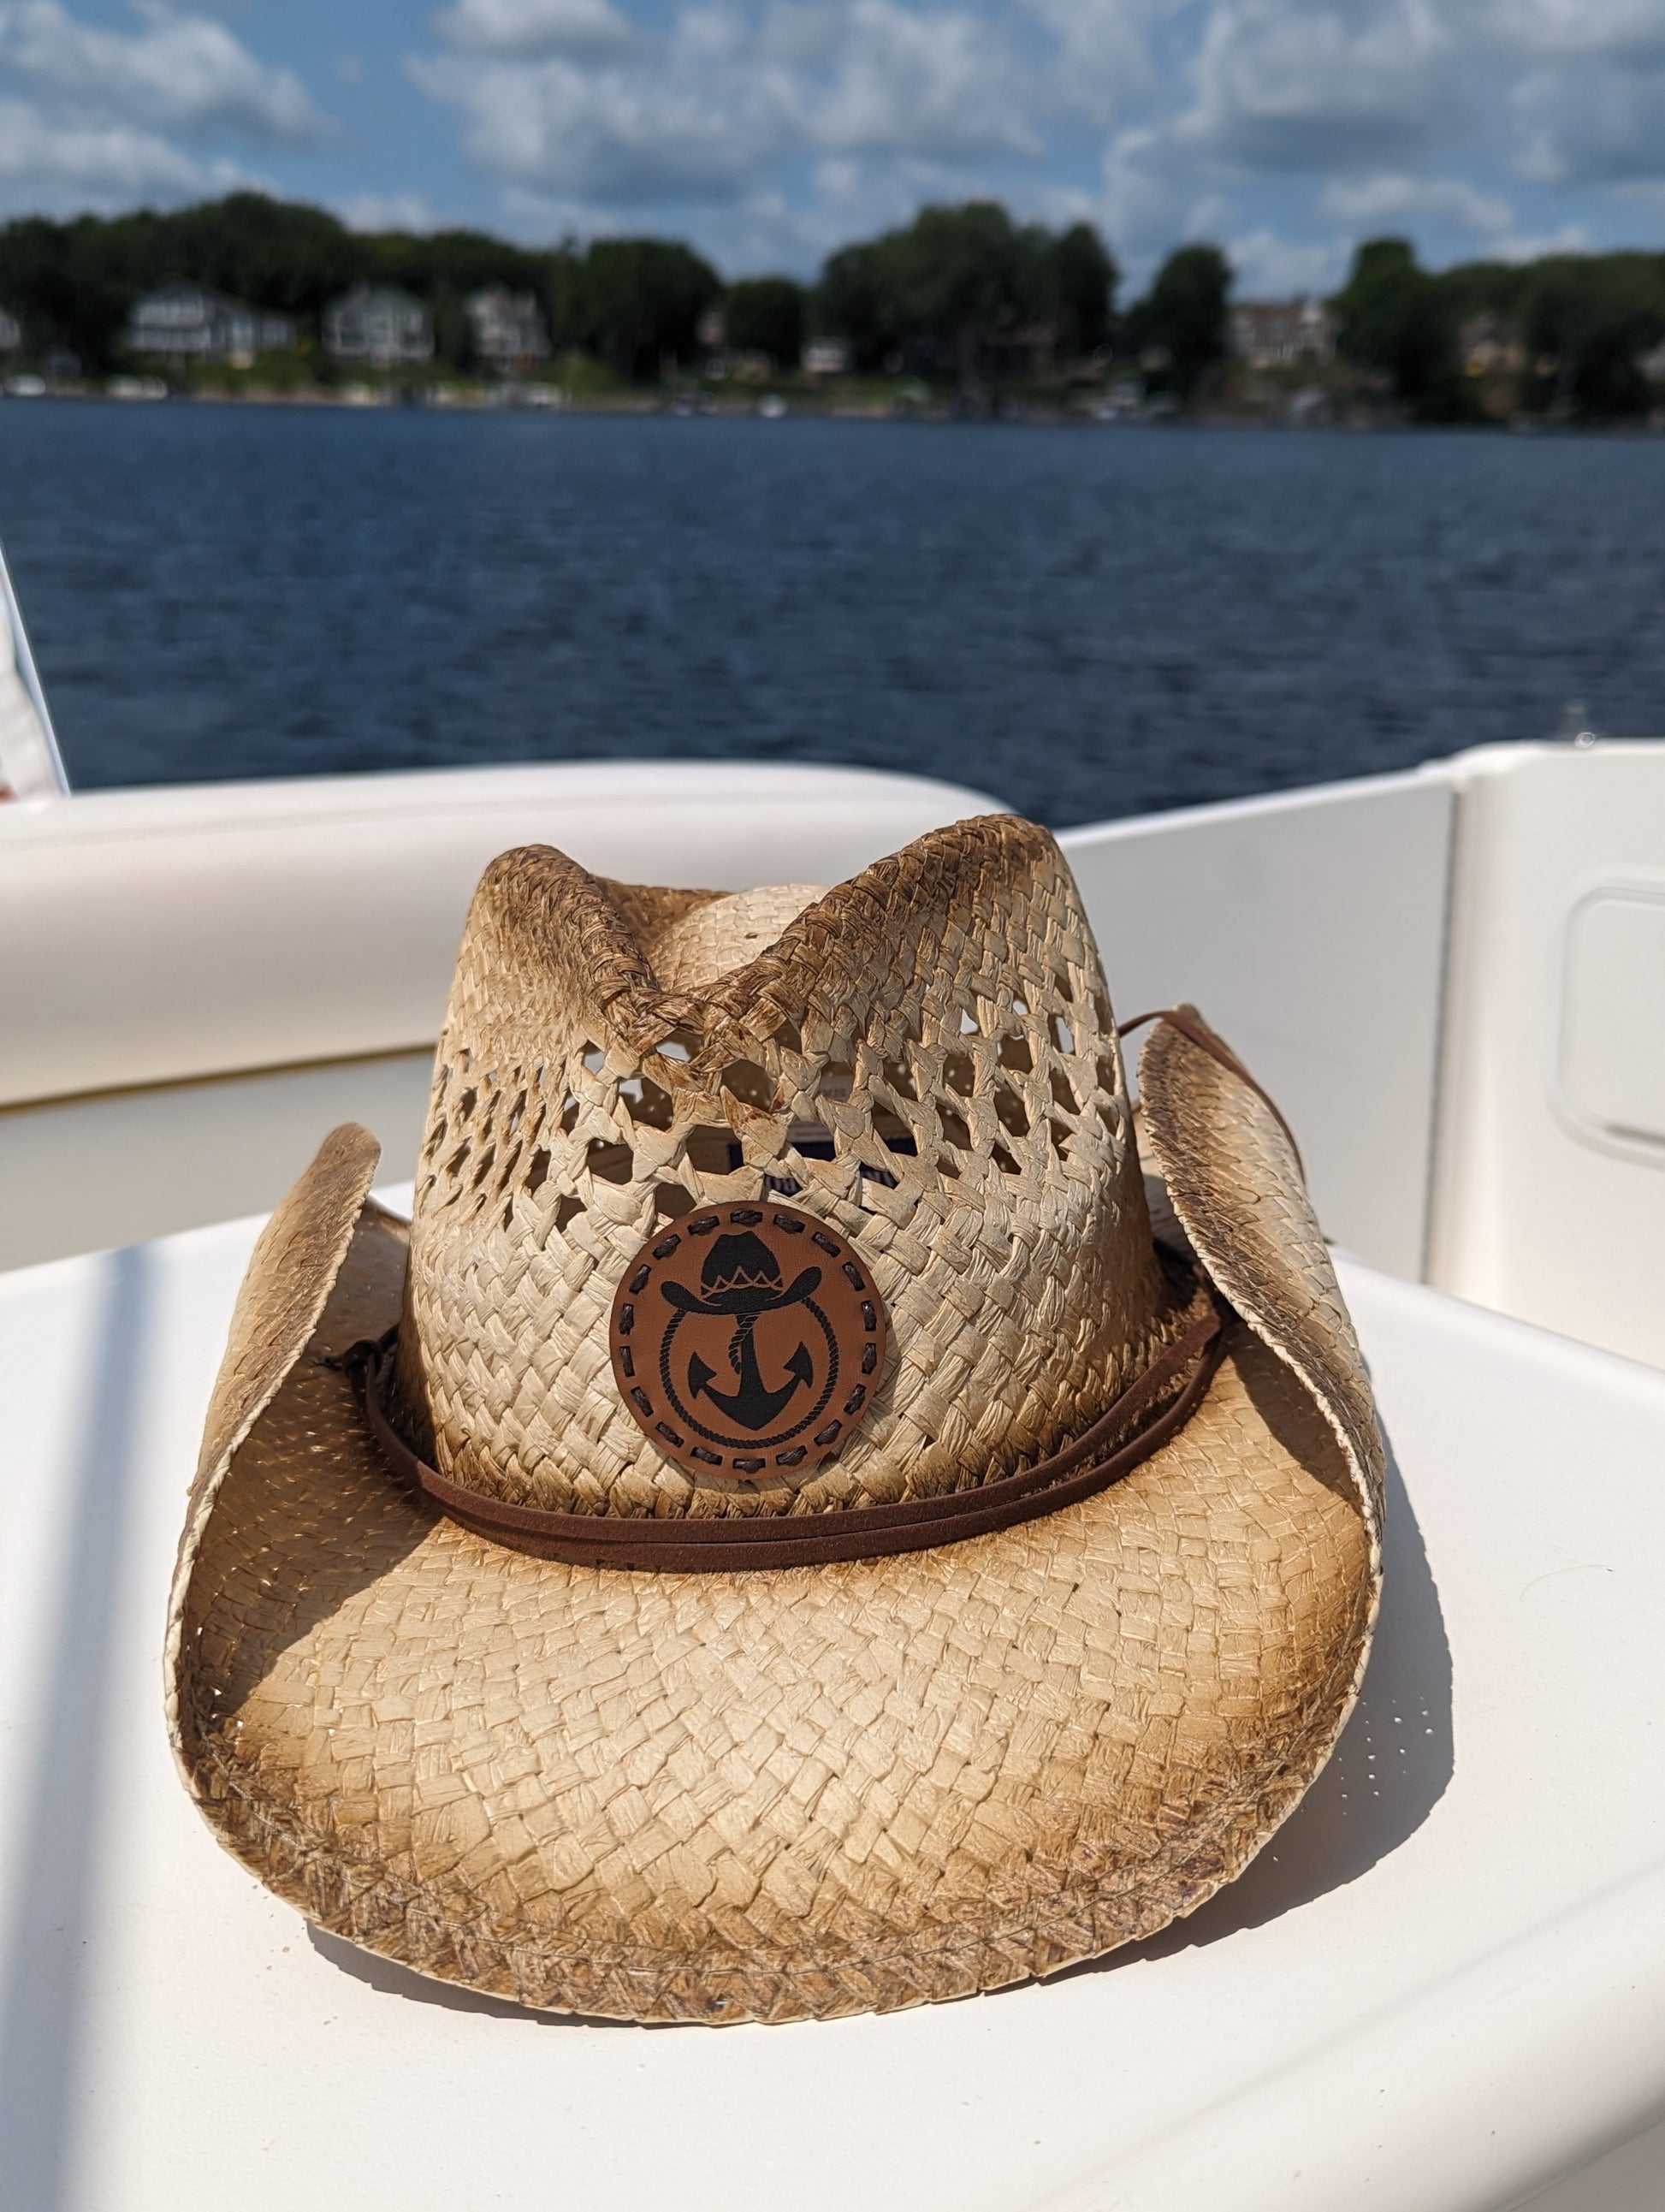 Photo of a Lake Cowboy Signature Cowboy Hat with the iconic hat, lasso and anchor logomark on the front of the hat. The hat is shown sitting on a table on a boat on Lake Minnetonka, MN.